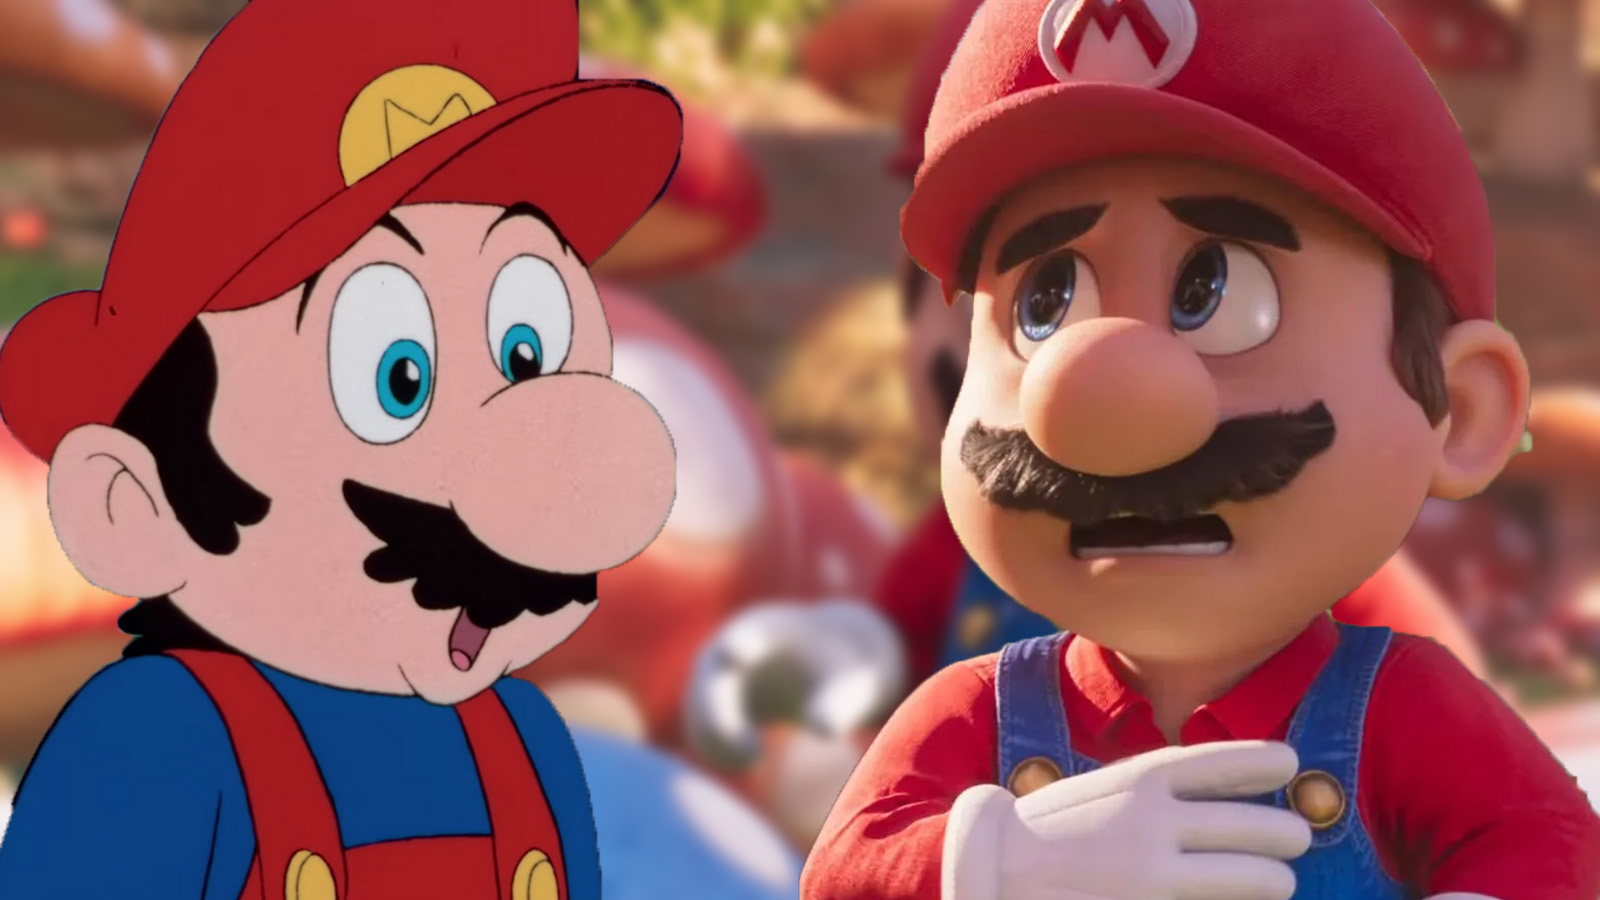 Video Game Theory Suggests 'Mario' Has Its Own Multiverse of Madness